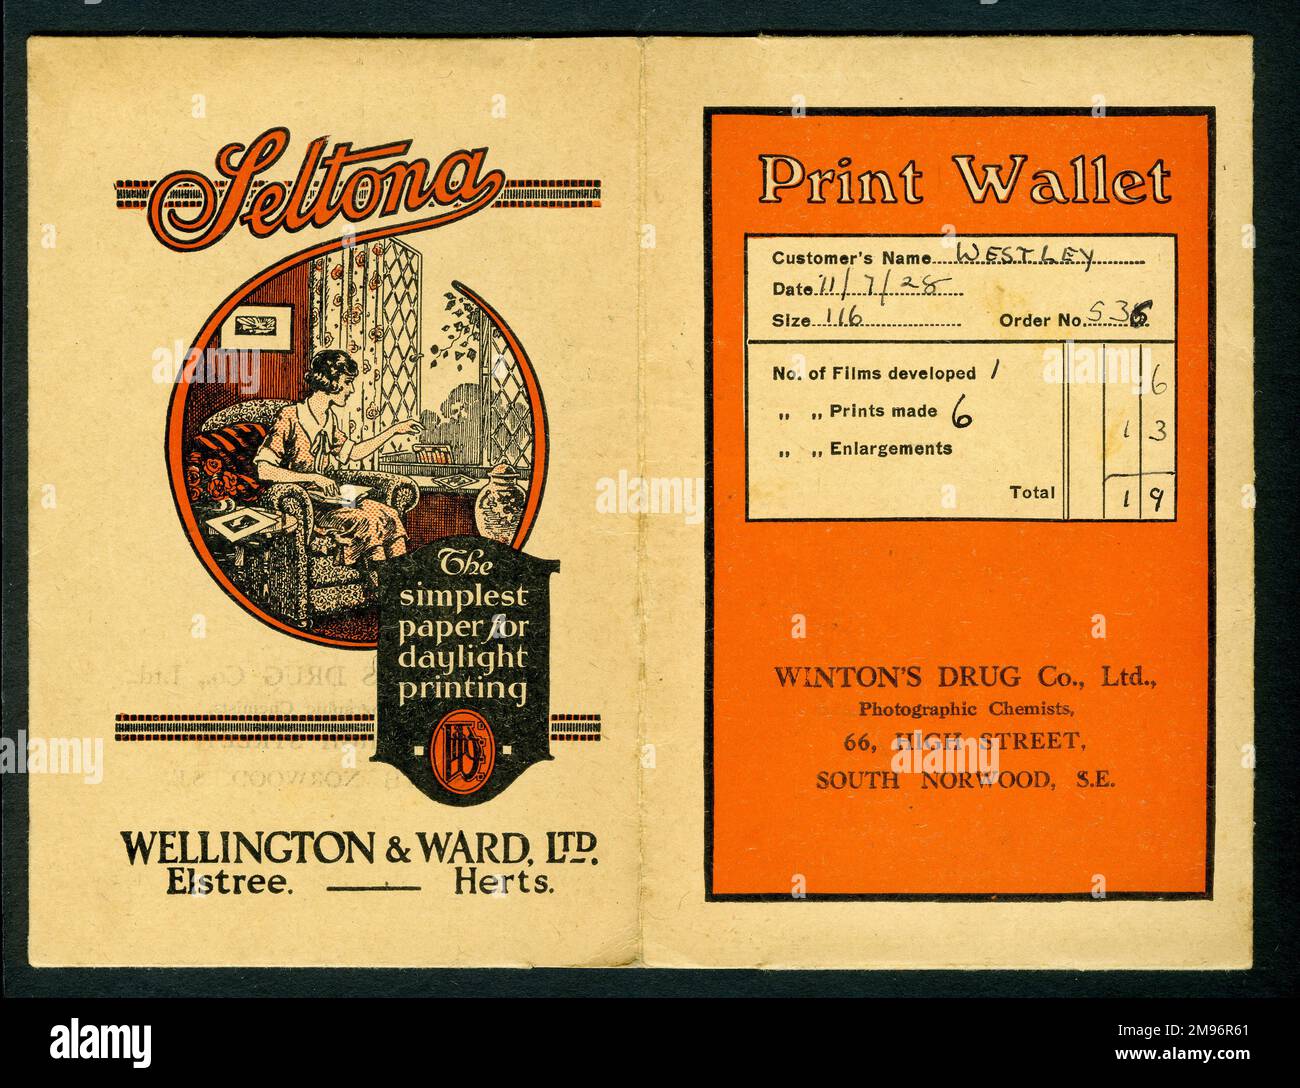 Photographic print wallet, Seltona, Wellington & Ward Ltd, Elstree, Hertfordshire.  The simplest paper for daylight printing.  Photographs developed by Winton's Drug Co Ltd, South Norwood, London.  One film developed and six prints made, costing a total of one shilling and ninepence. Stock Photo